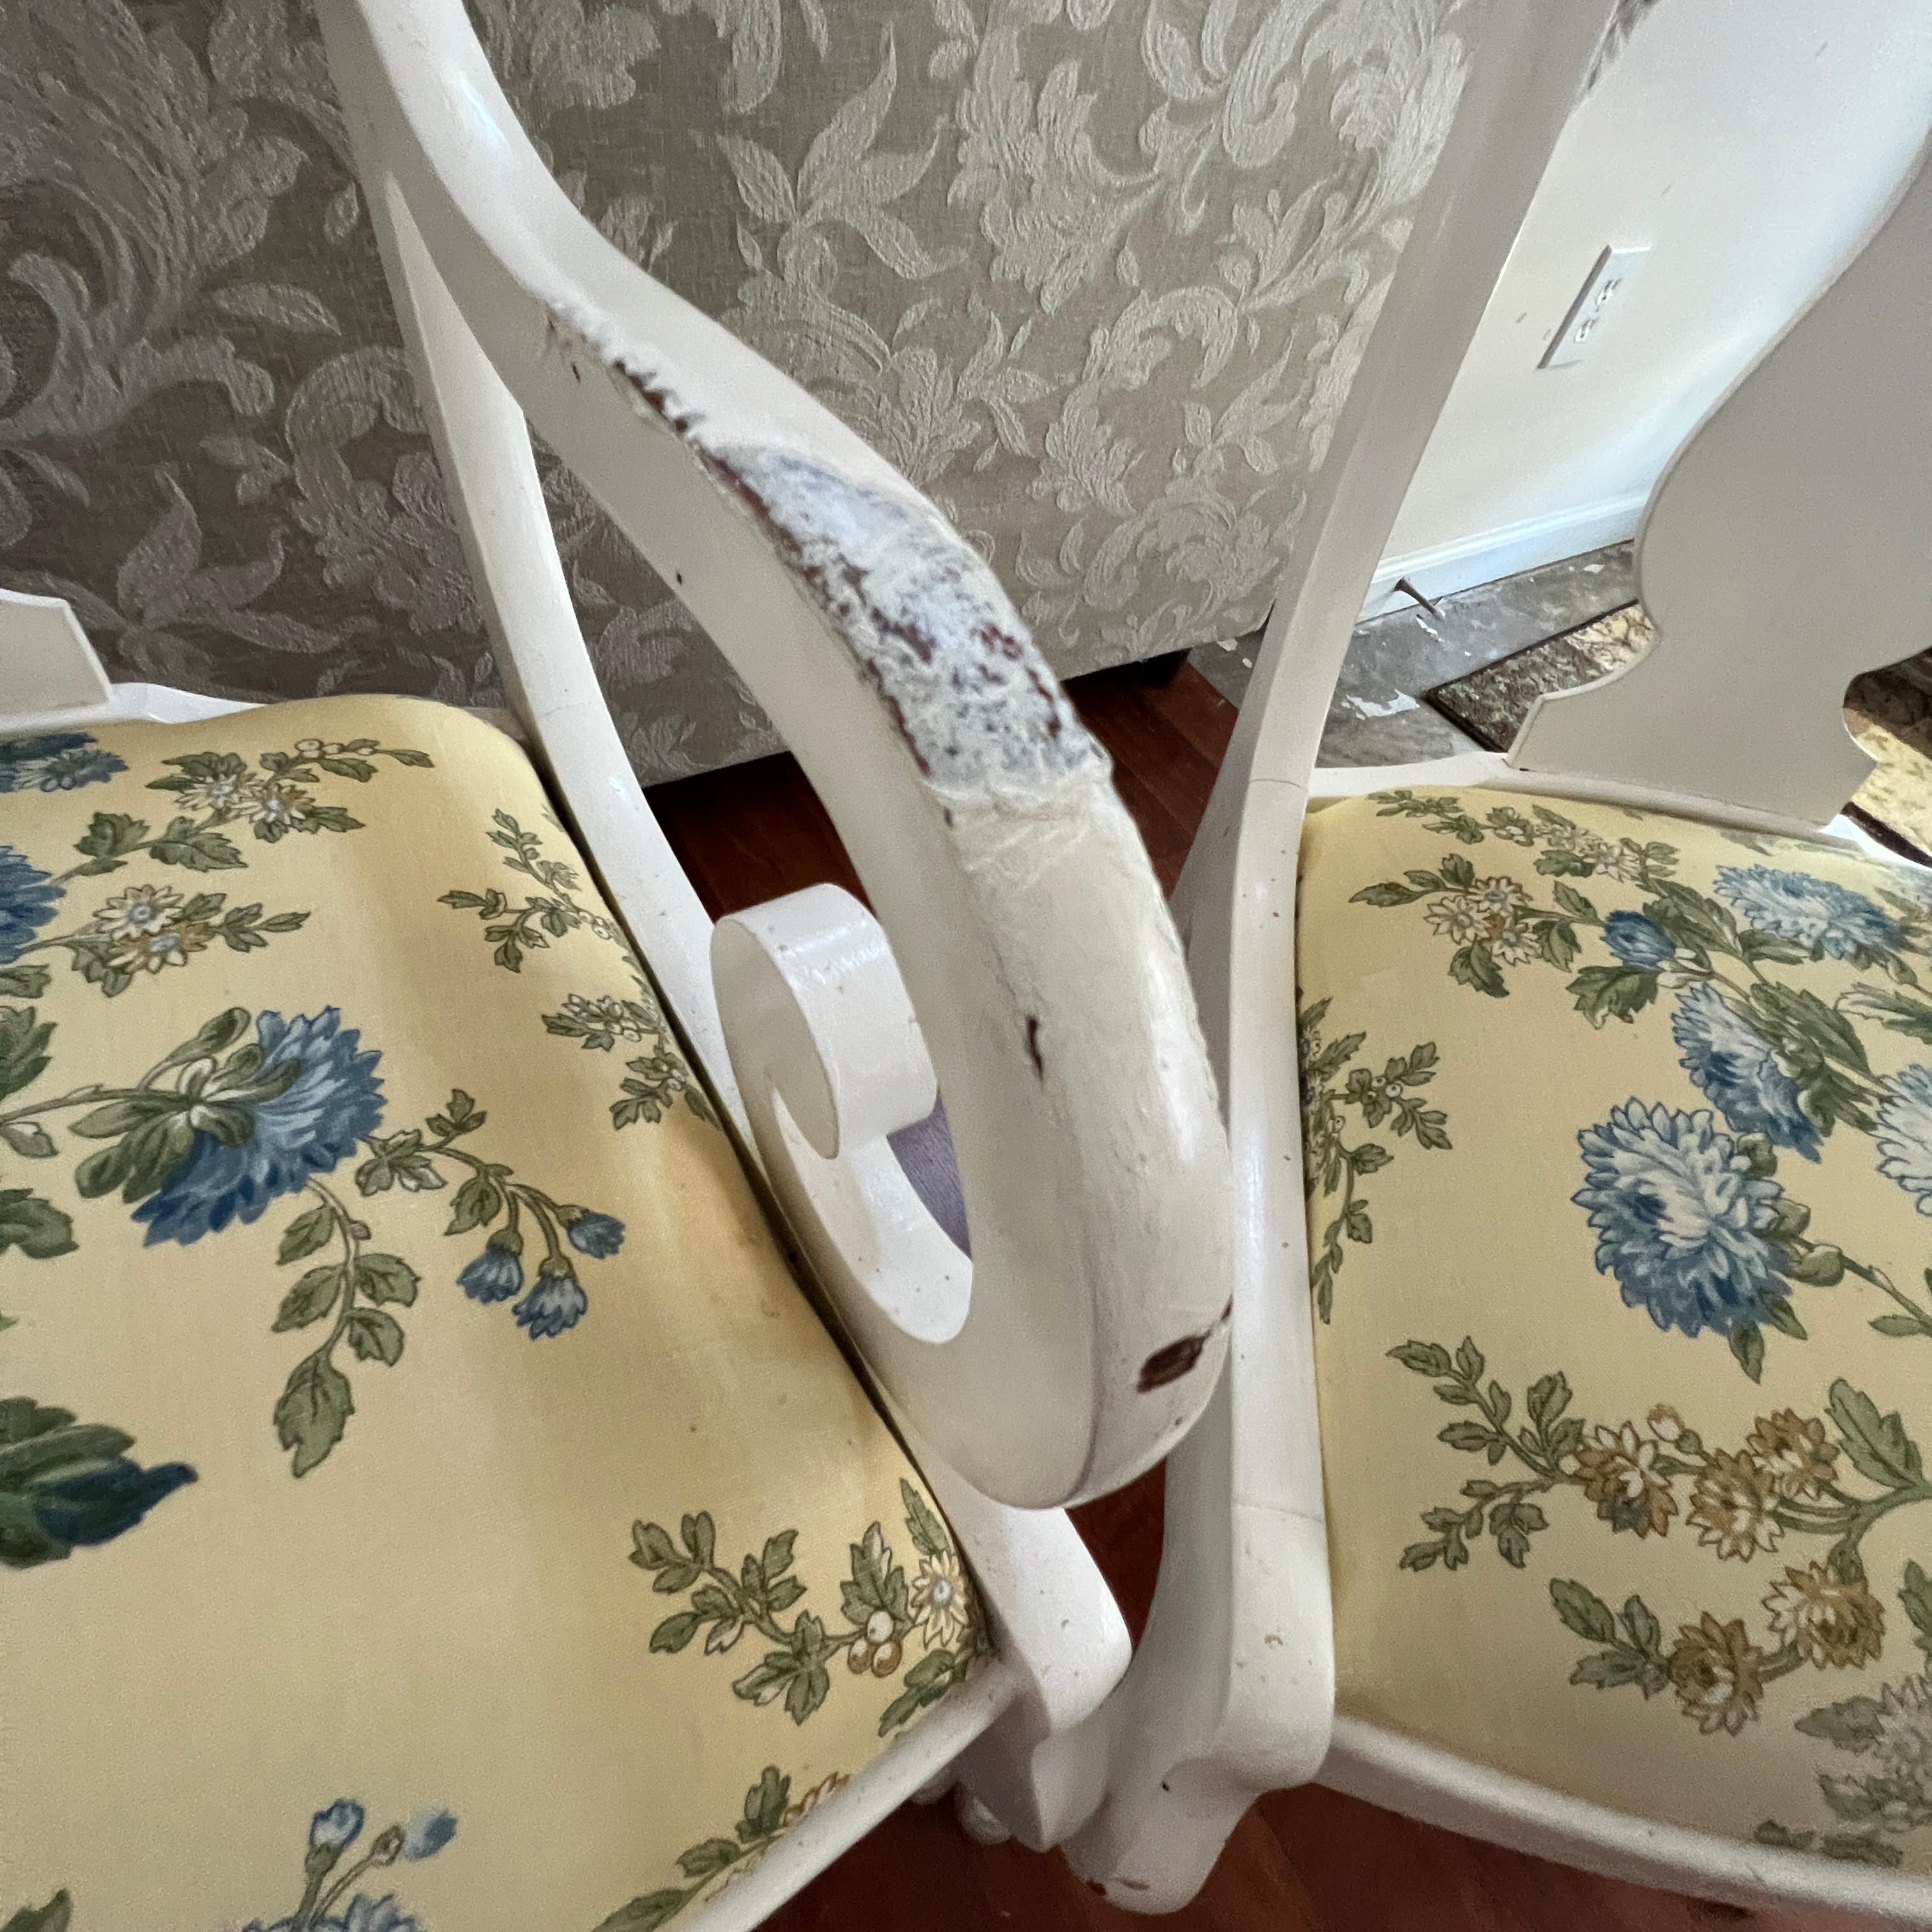 Set of 4 Dining Chairs Painted White with Floral Upholstered Seats - 1 Captain's Chair